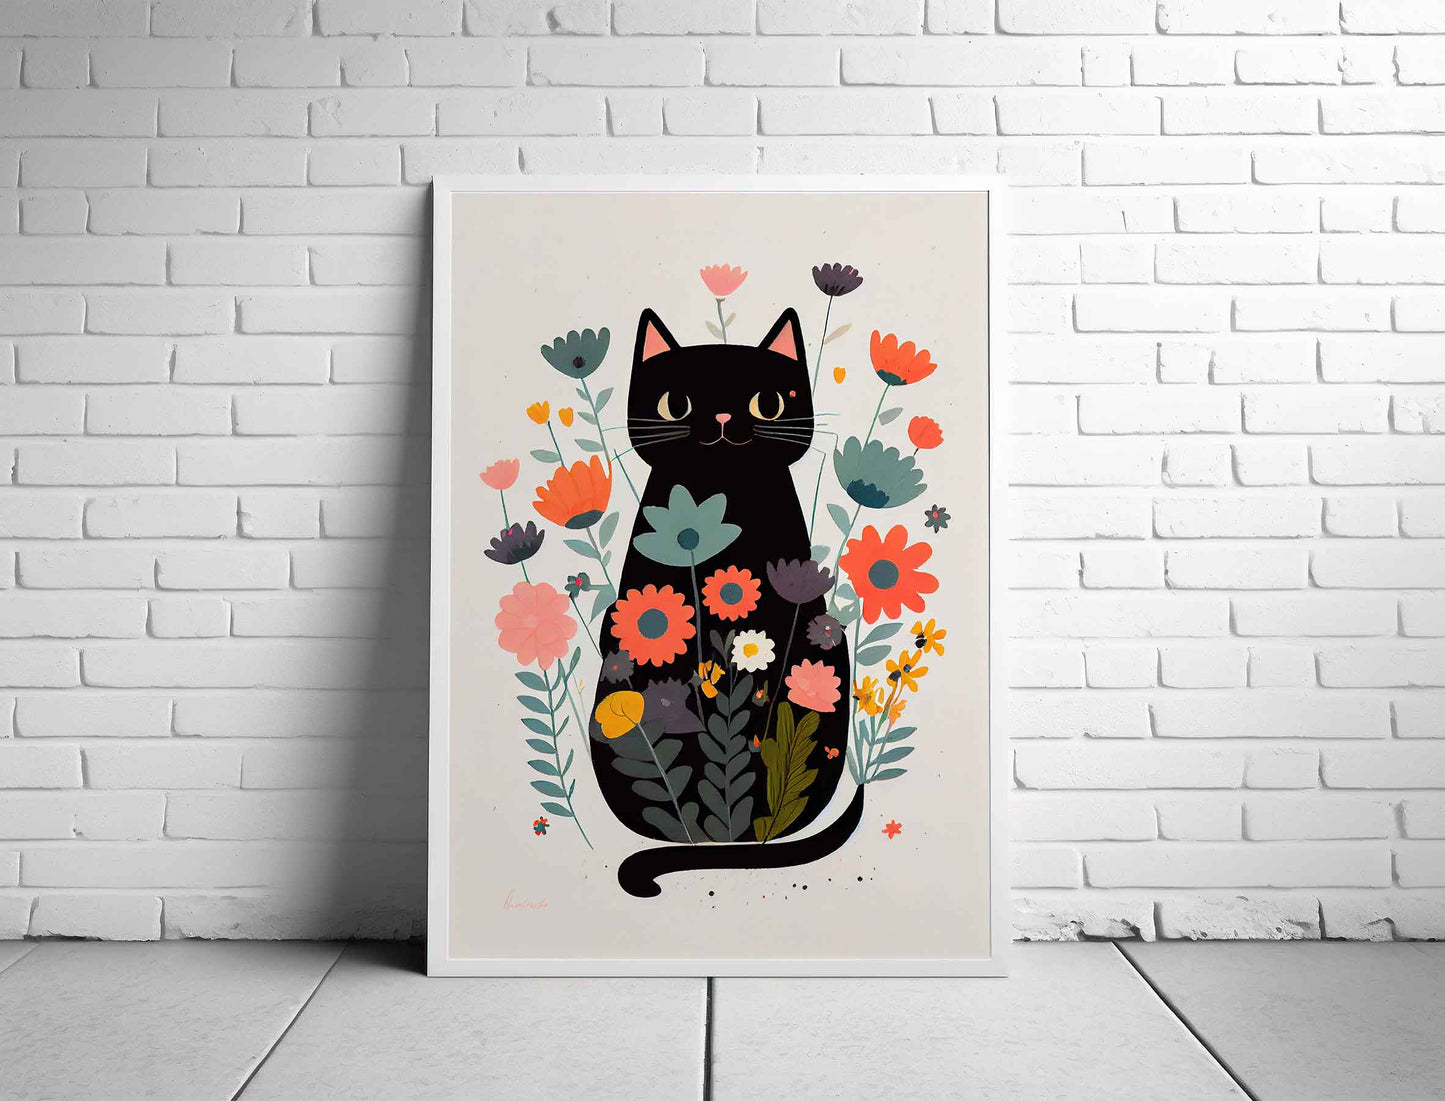 Framed Image of Cute Black Cat With Flowers Wall Art Poster Print